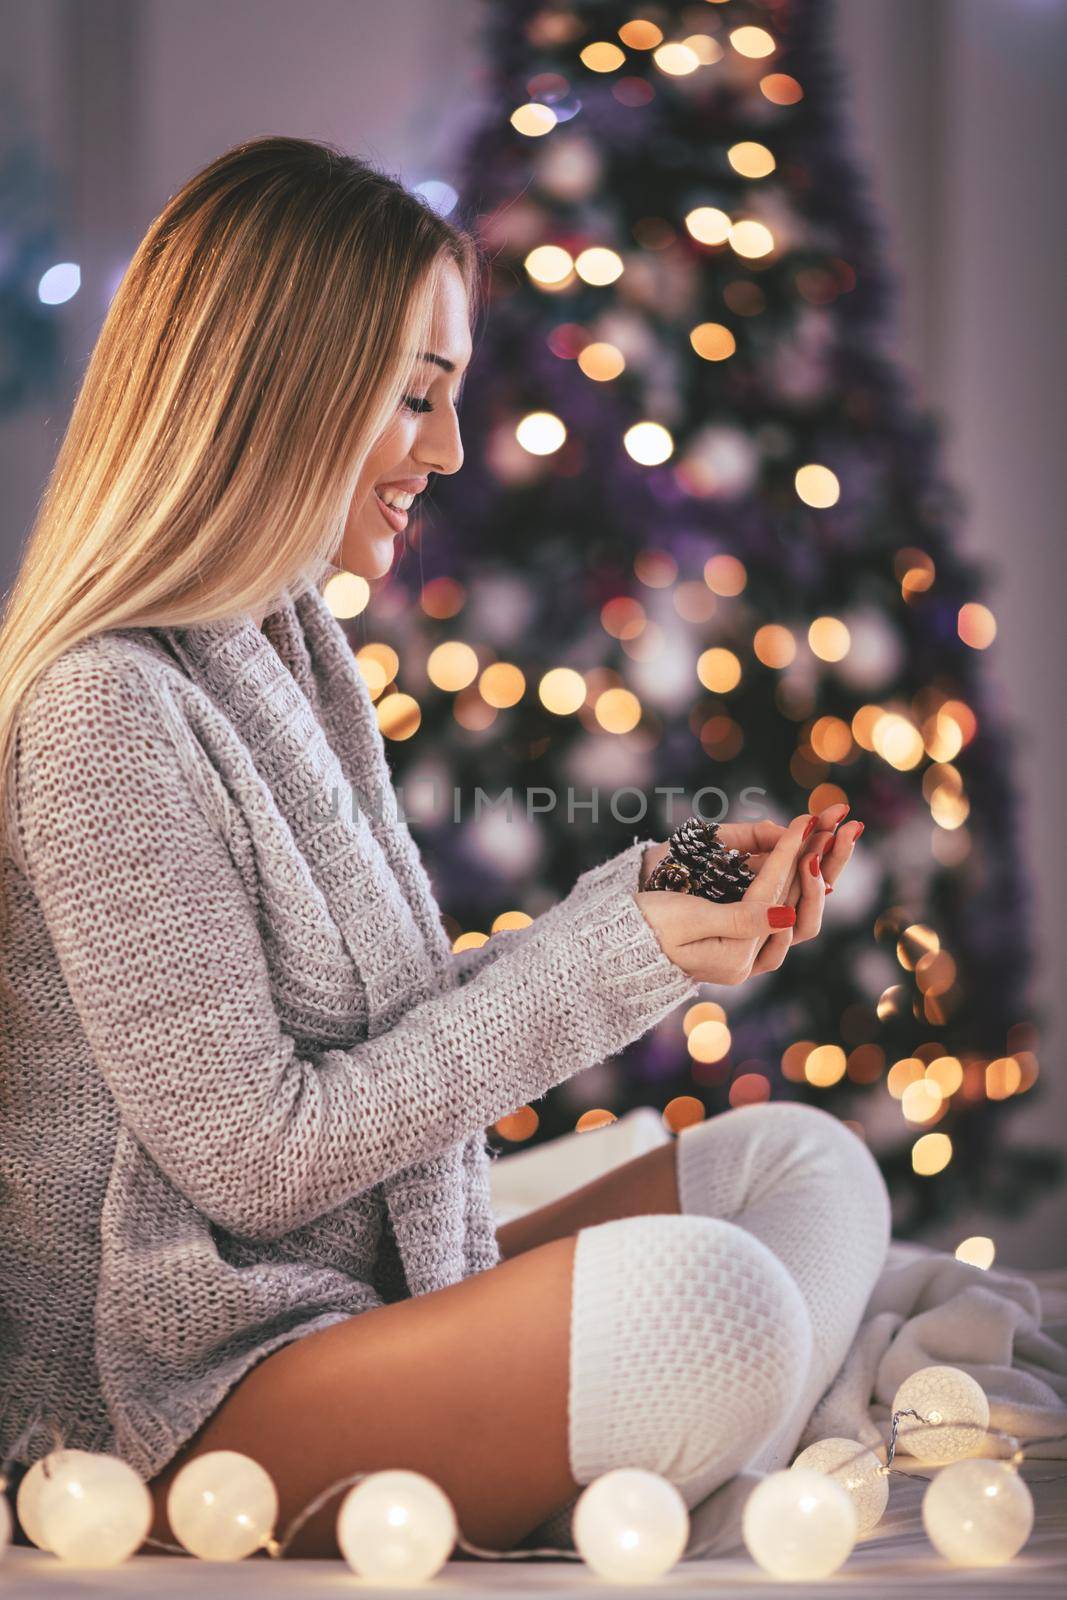 A cute young smiling woman holding pinecones in her hands surrounded with Christmas lights. 